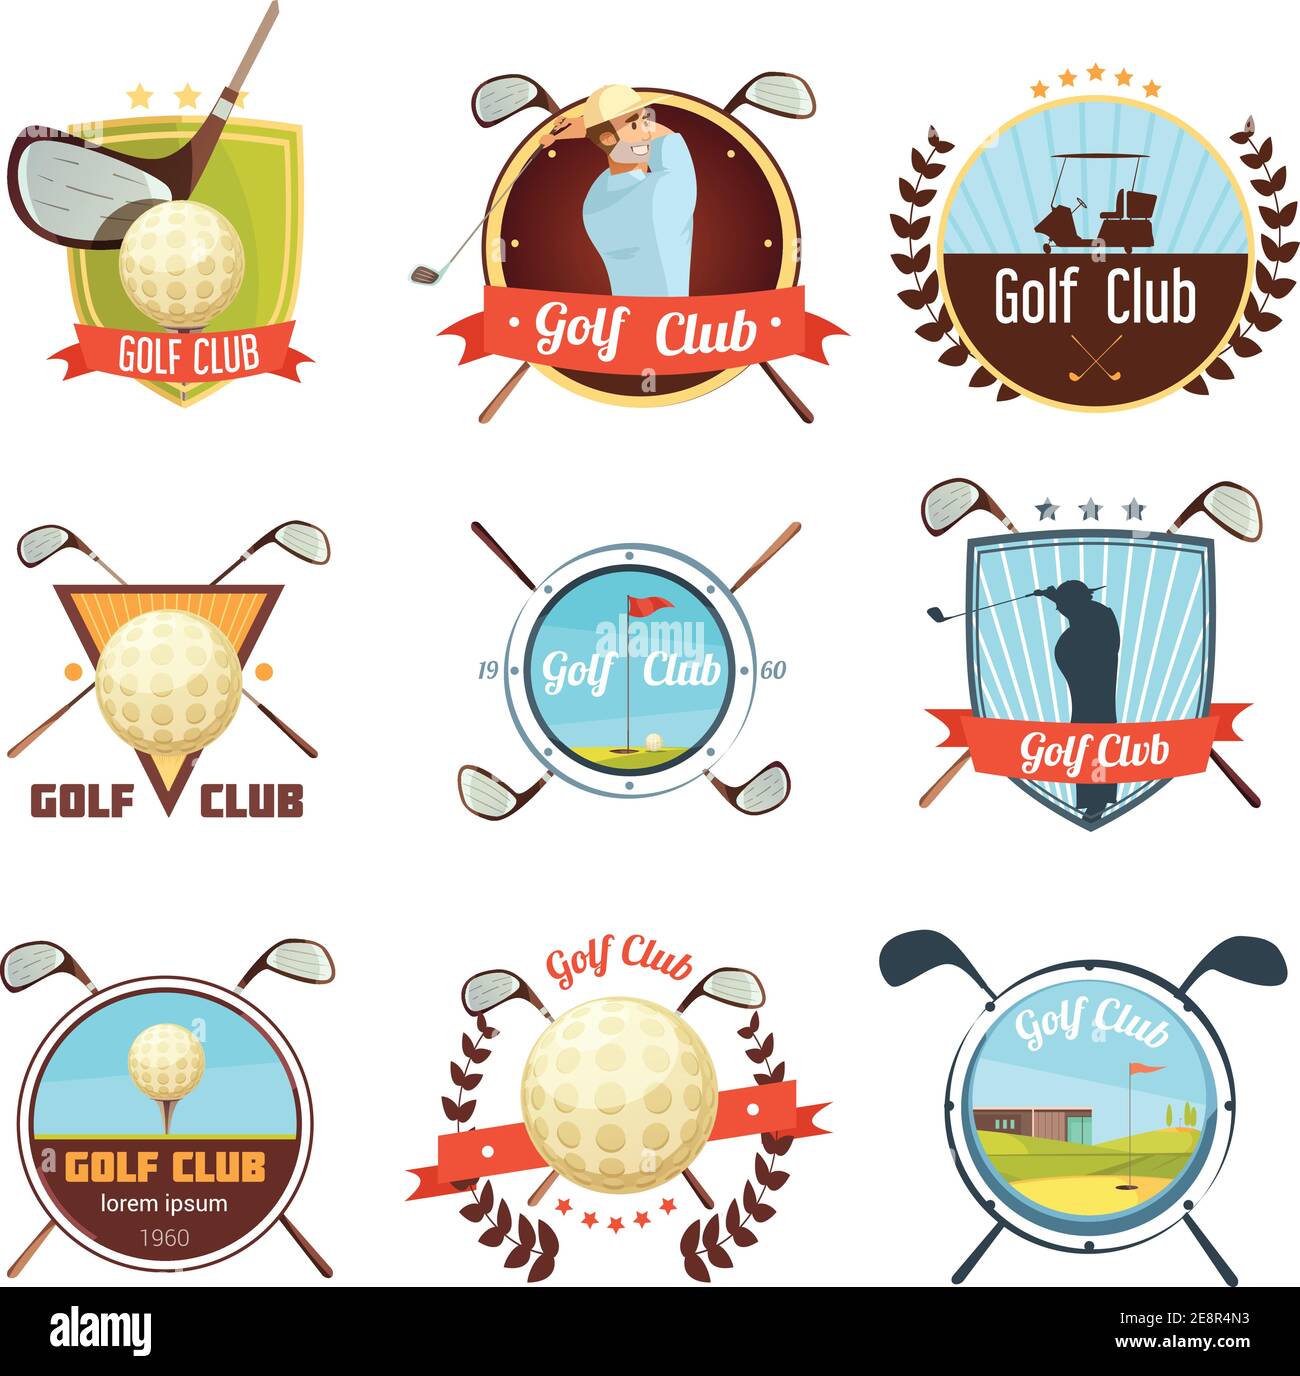 Popular golf clubs retro style labels collection with bag ball and player on course isolated vector illustration Stock Vector